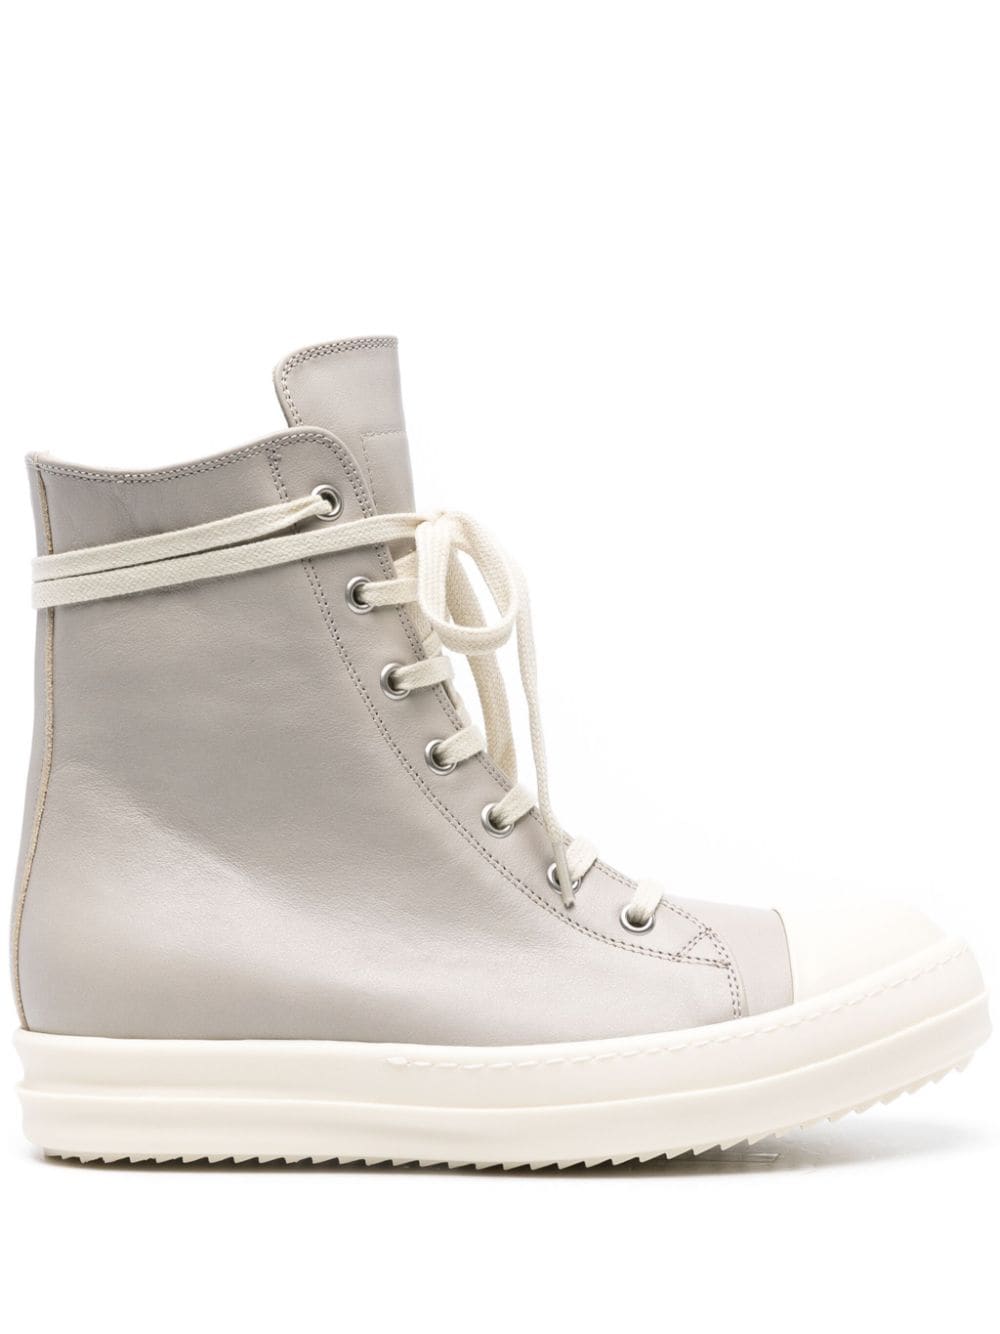 Rick Owens high-top leather sneakers - Grey von Rick Owens